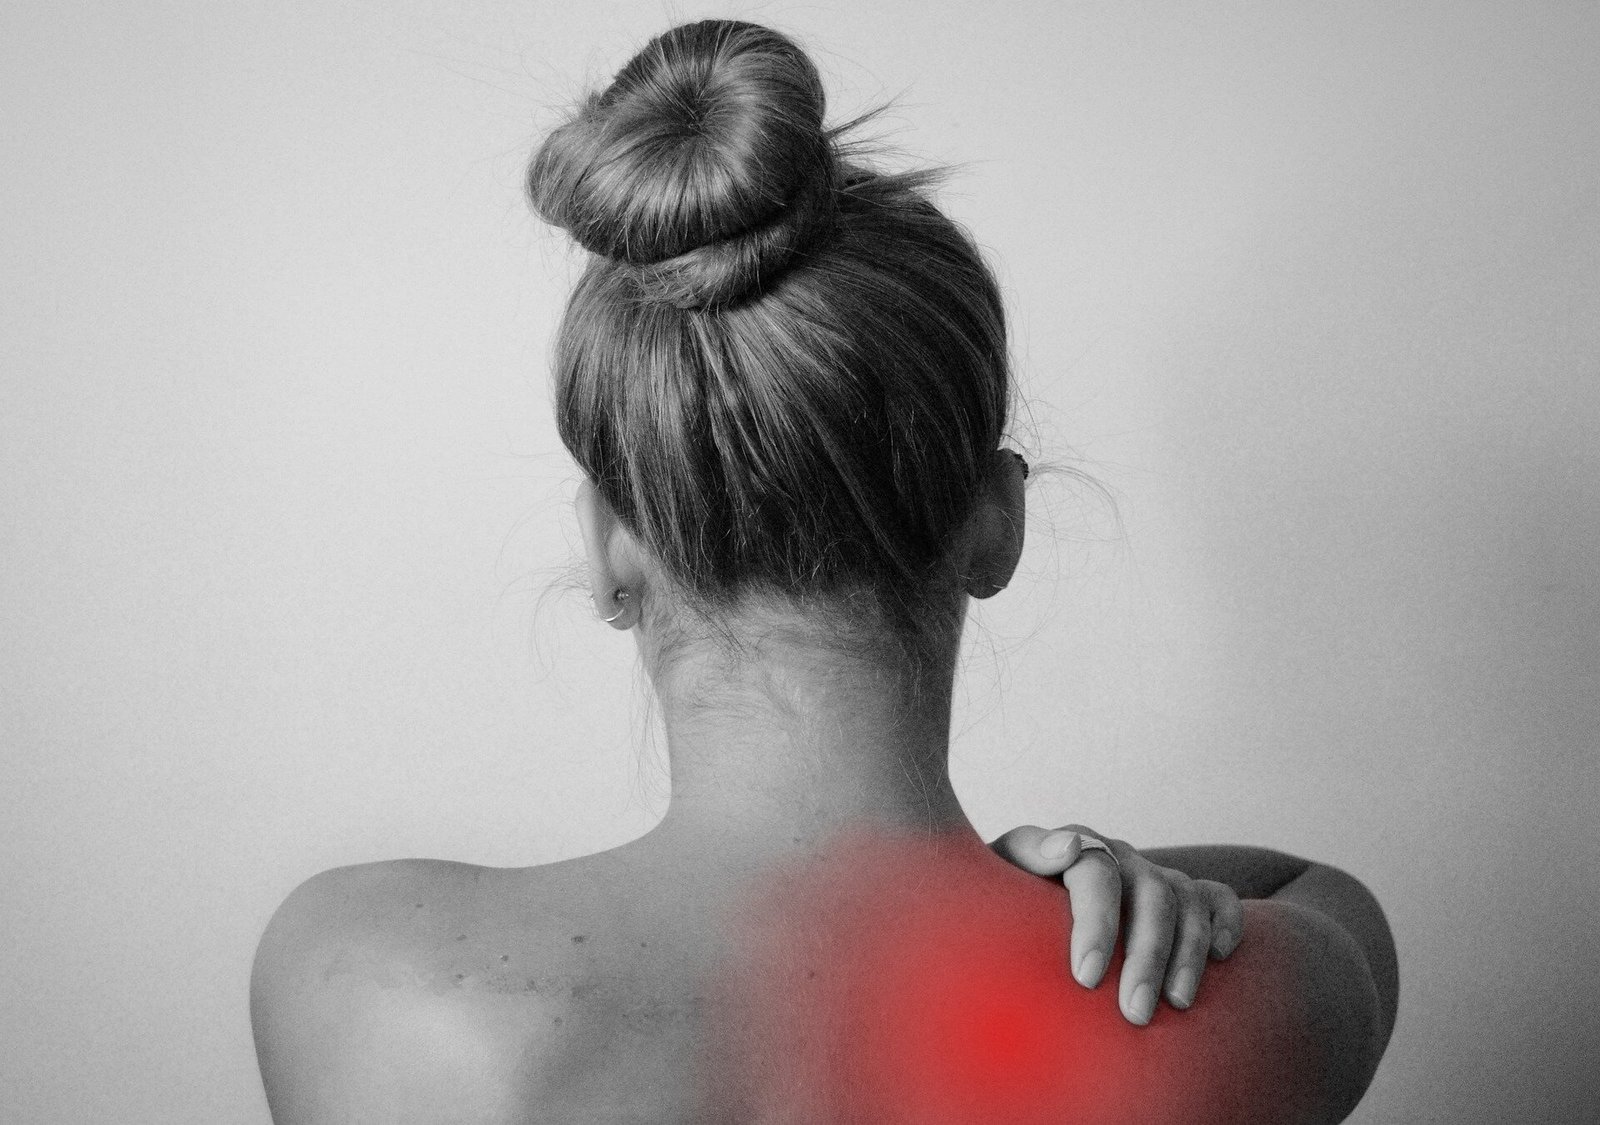 No benefit of physiotherapy over general advice after dislocated shoulder: Clinical trial